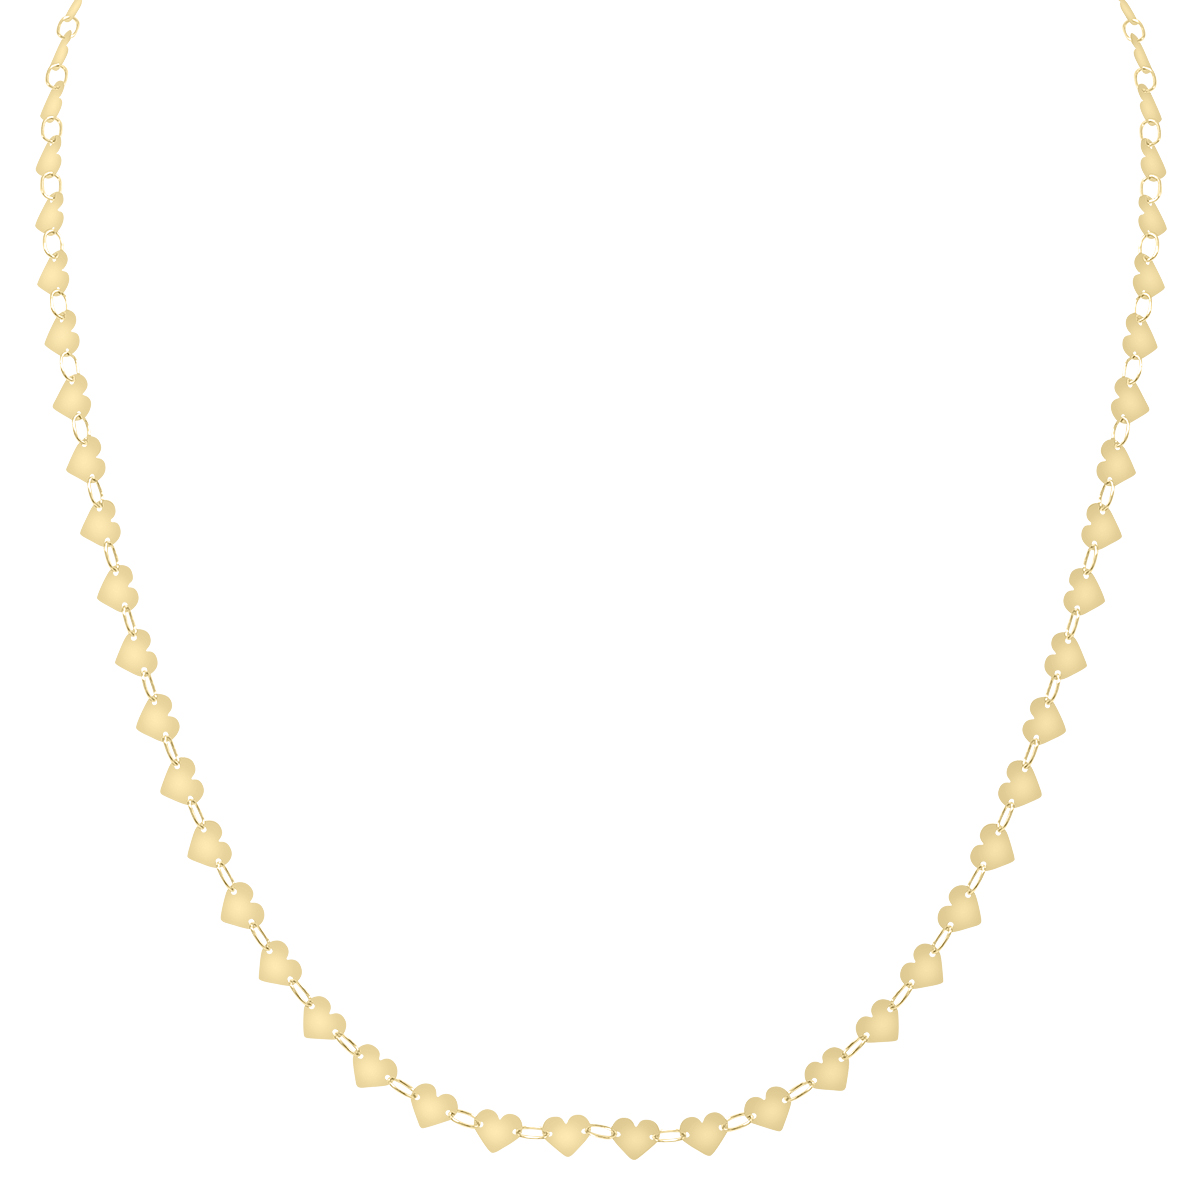 Image of 14K Yellow Gold Mirrored Chain Heart Strand Necklace with Lobster Clasp